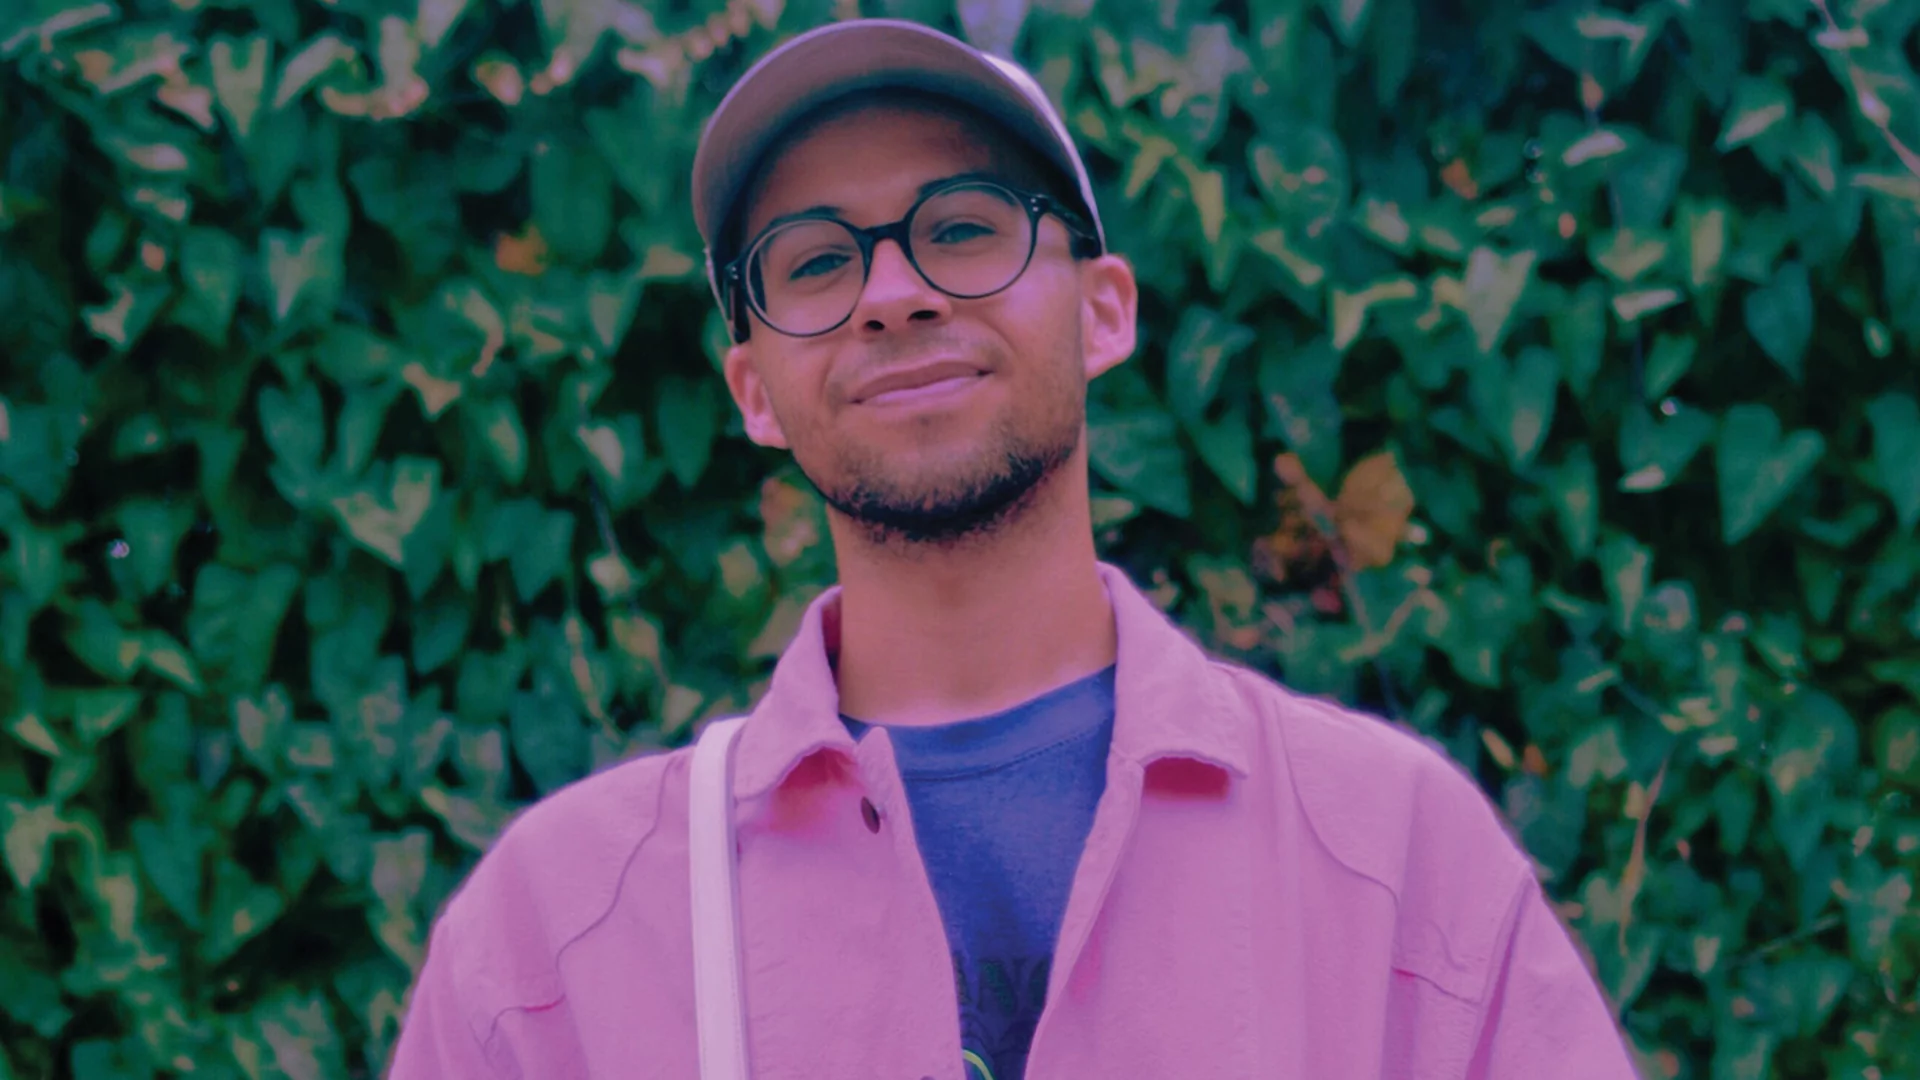 DJ SWISHA standing in front of a tall green hedge wearing a pink button up shirt, cap and glasses